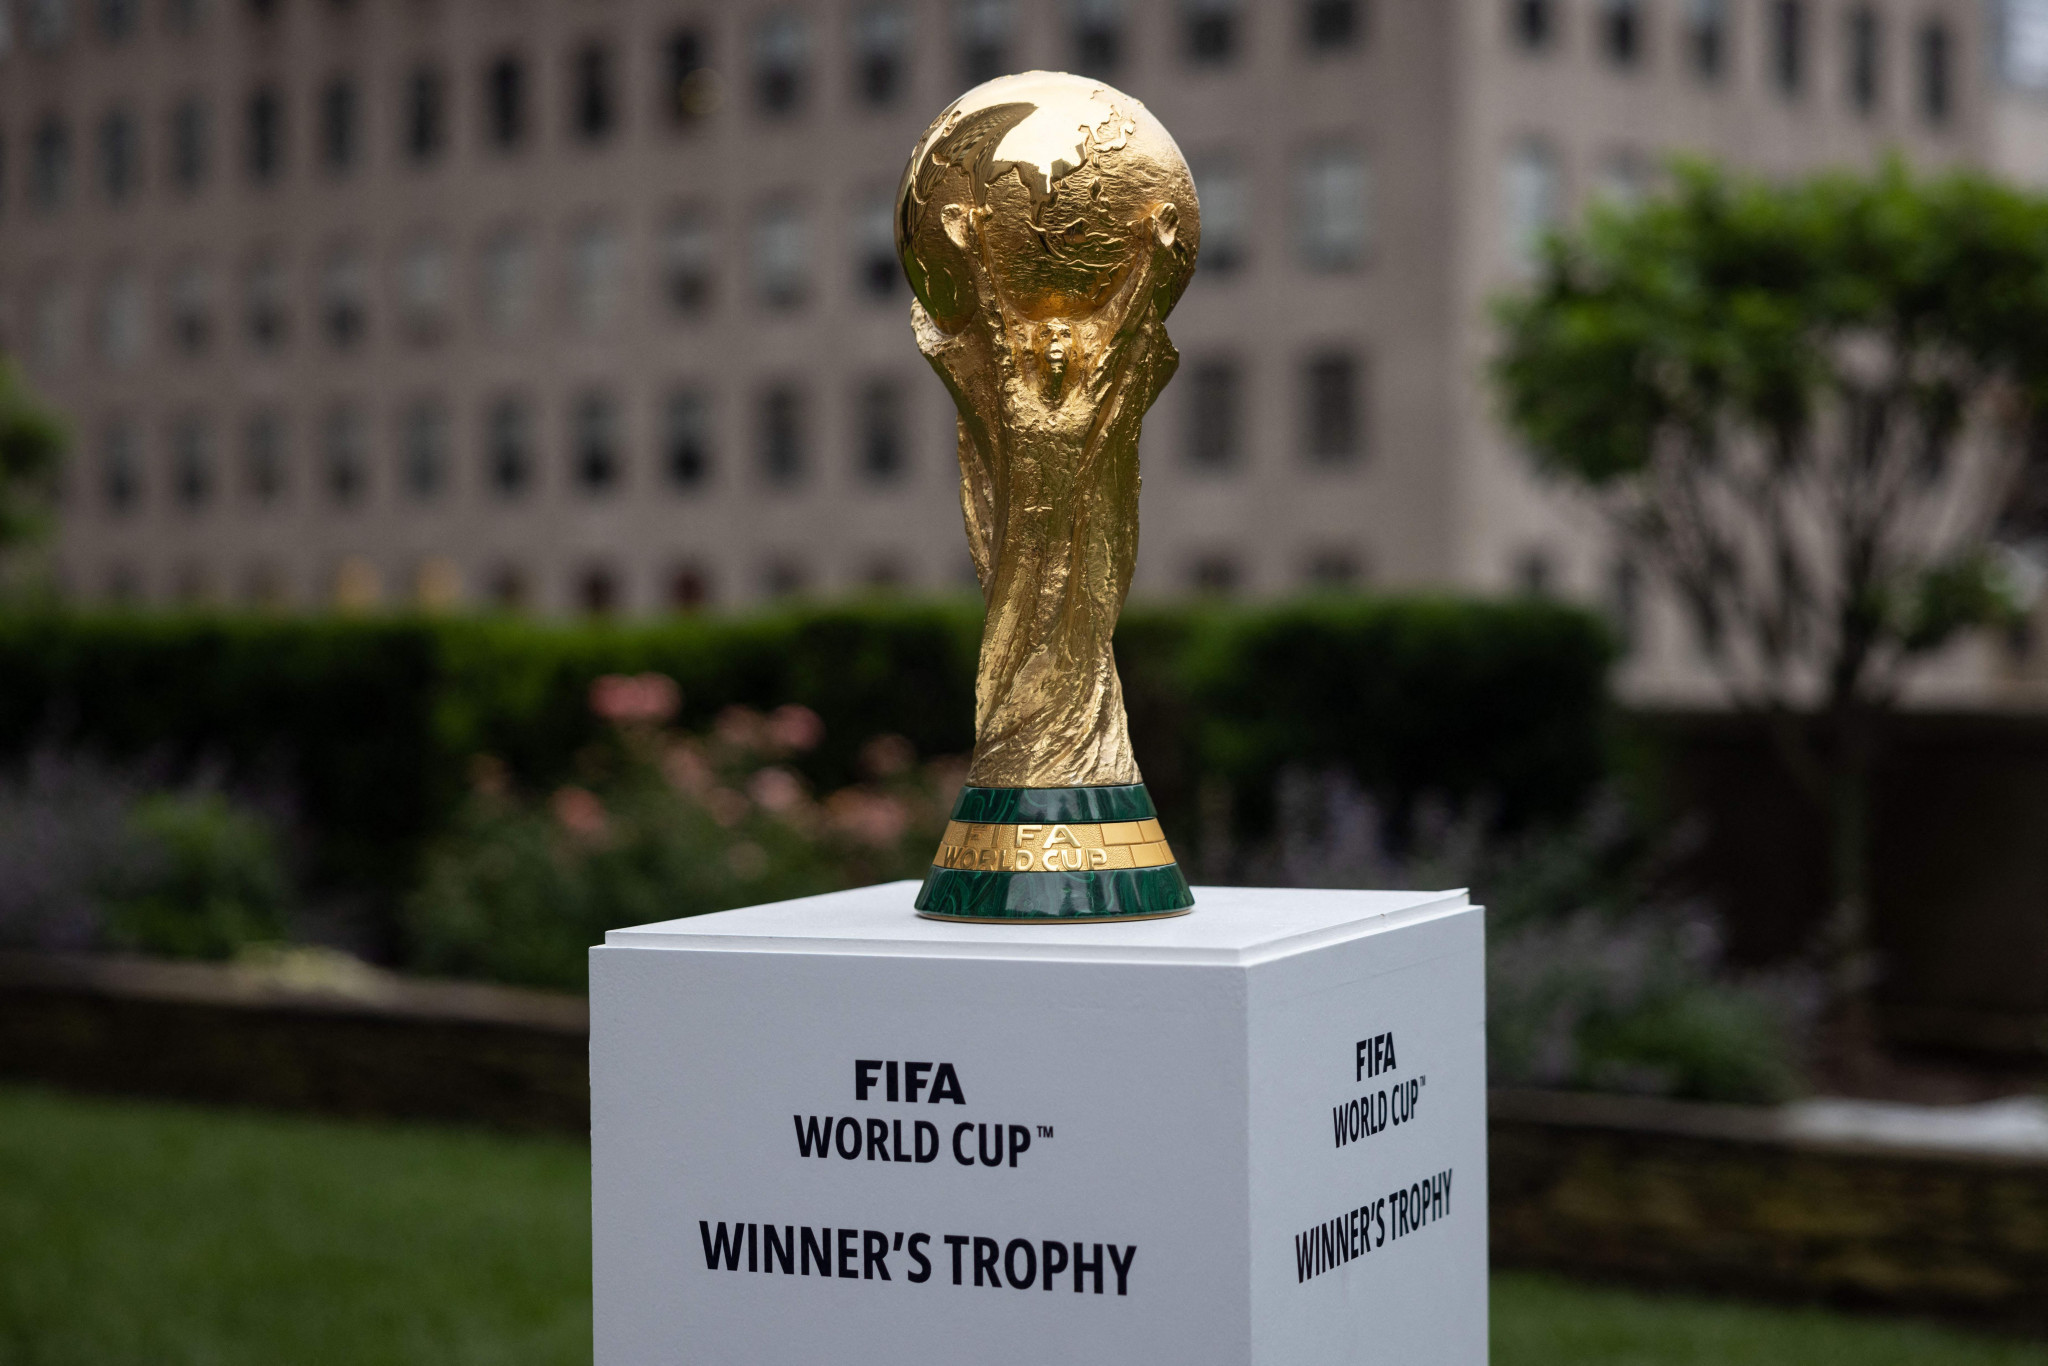 Saudi Arabia set to host 2034 FIFA World Cup after only rival Australia withdraws